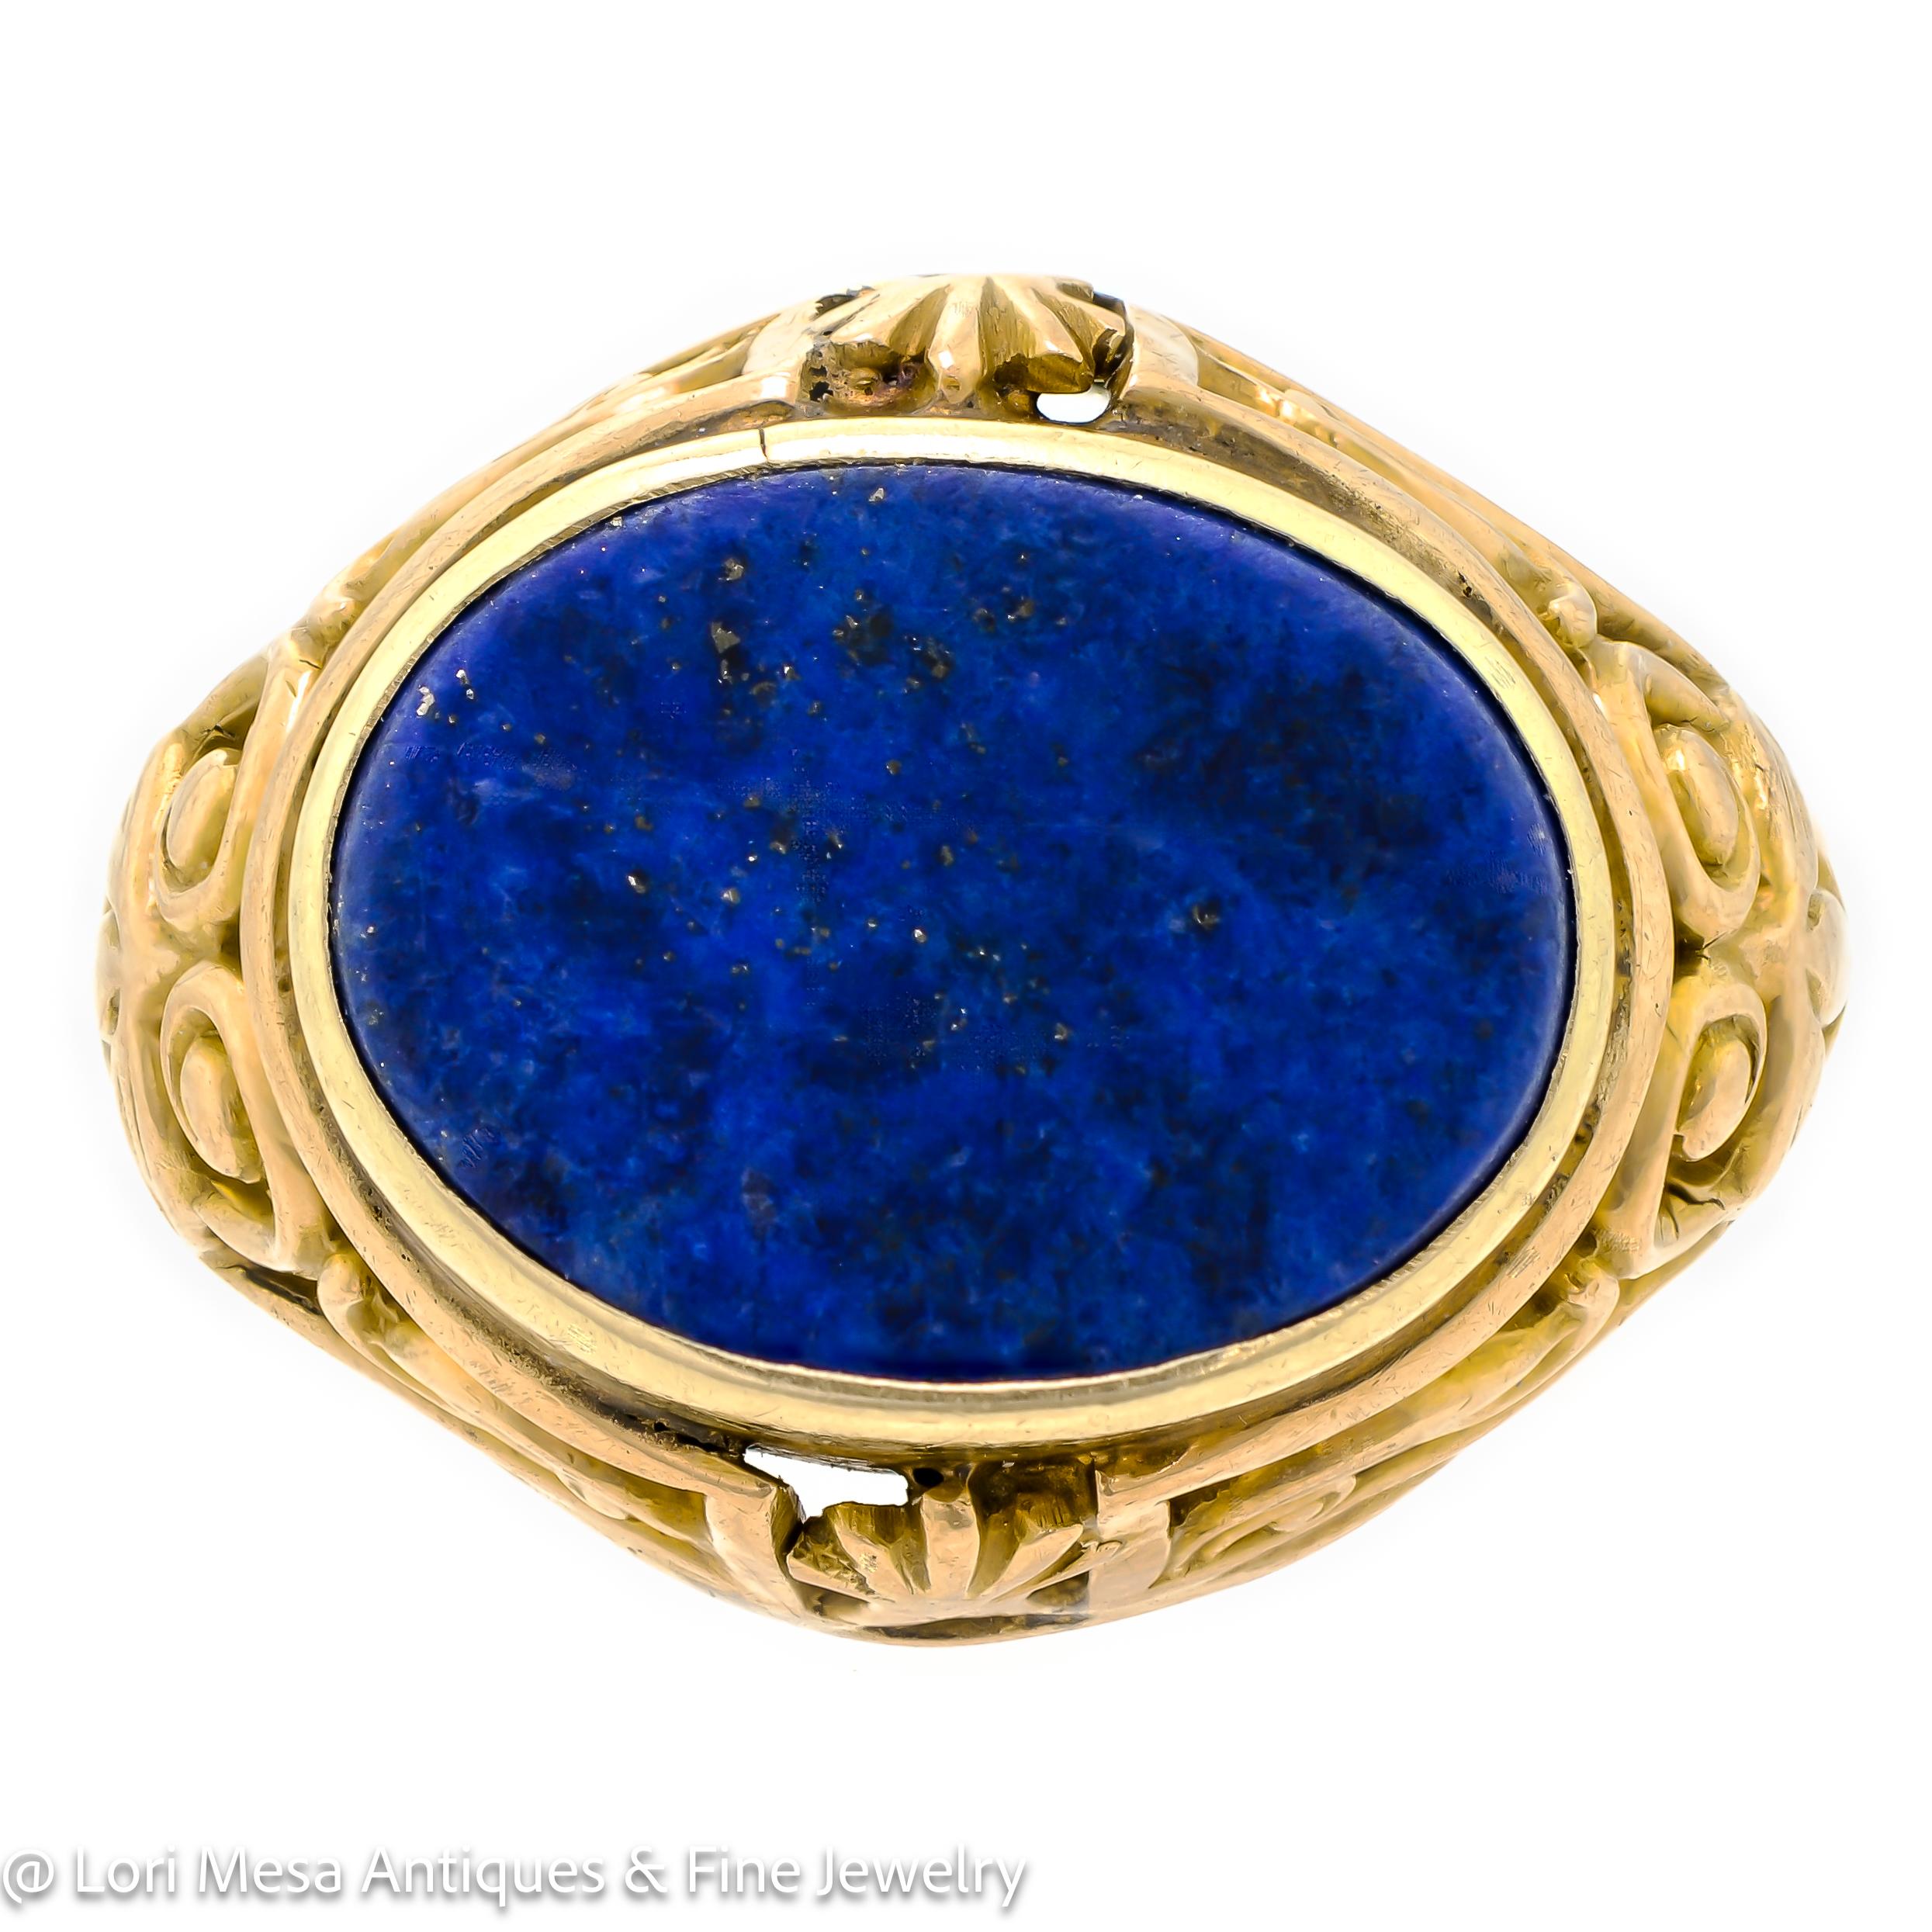 Delightful Victorian Oval Lapis and 14kt Yellow Gold Ring